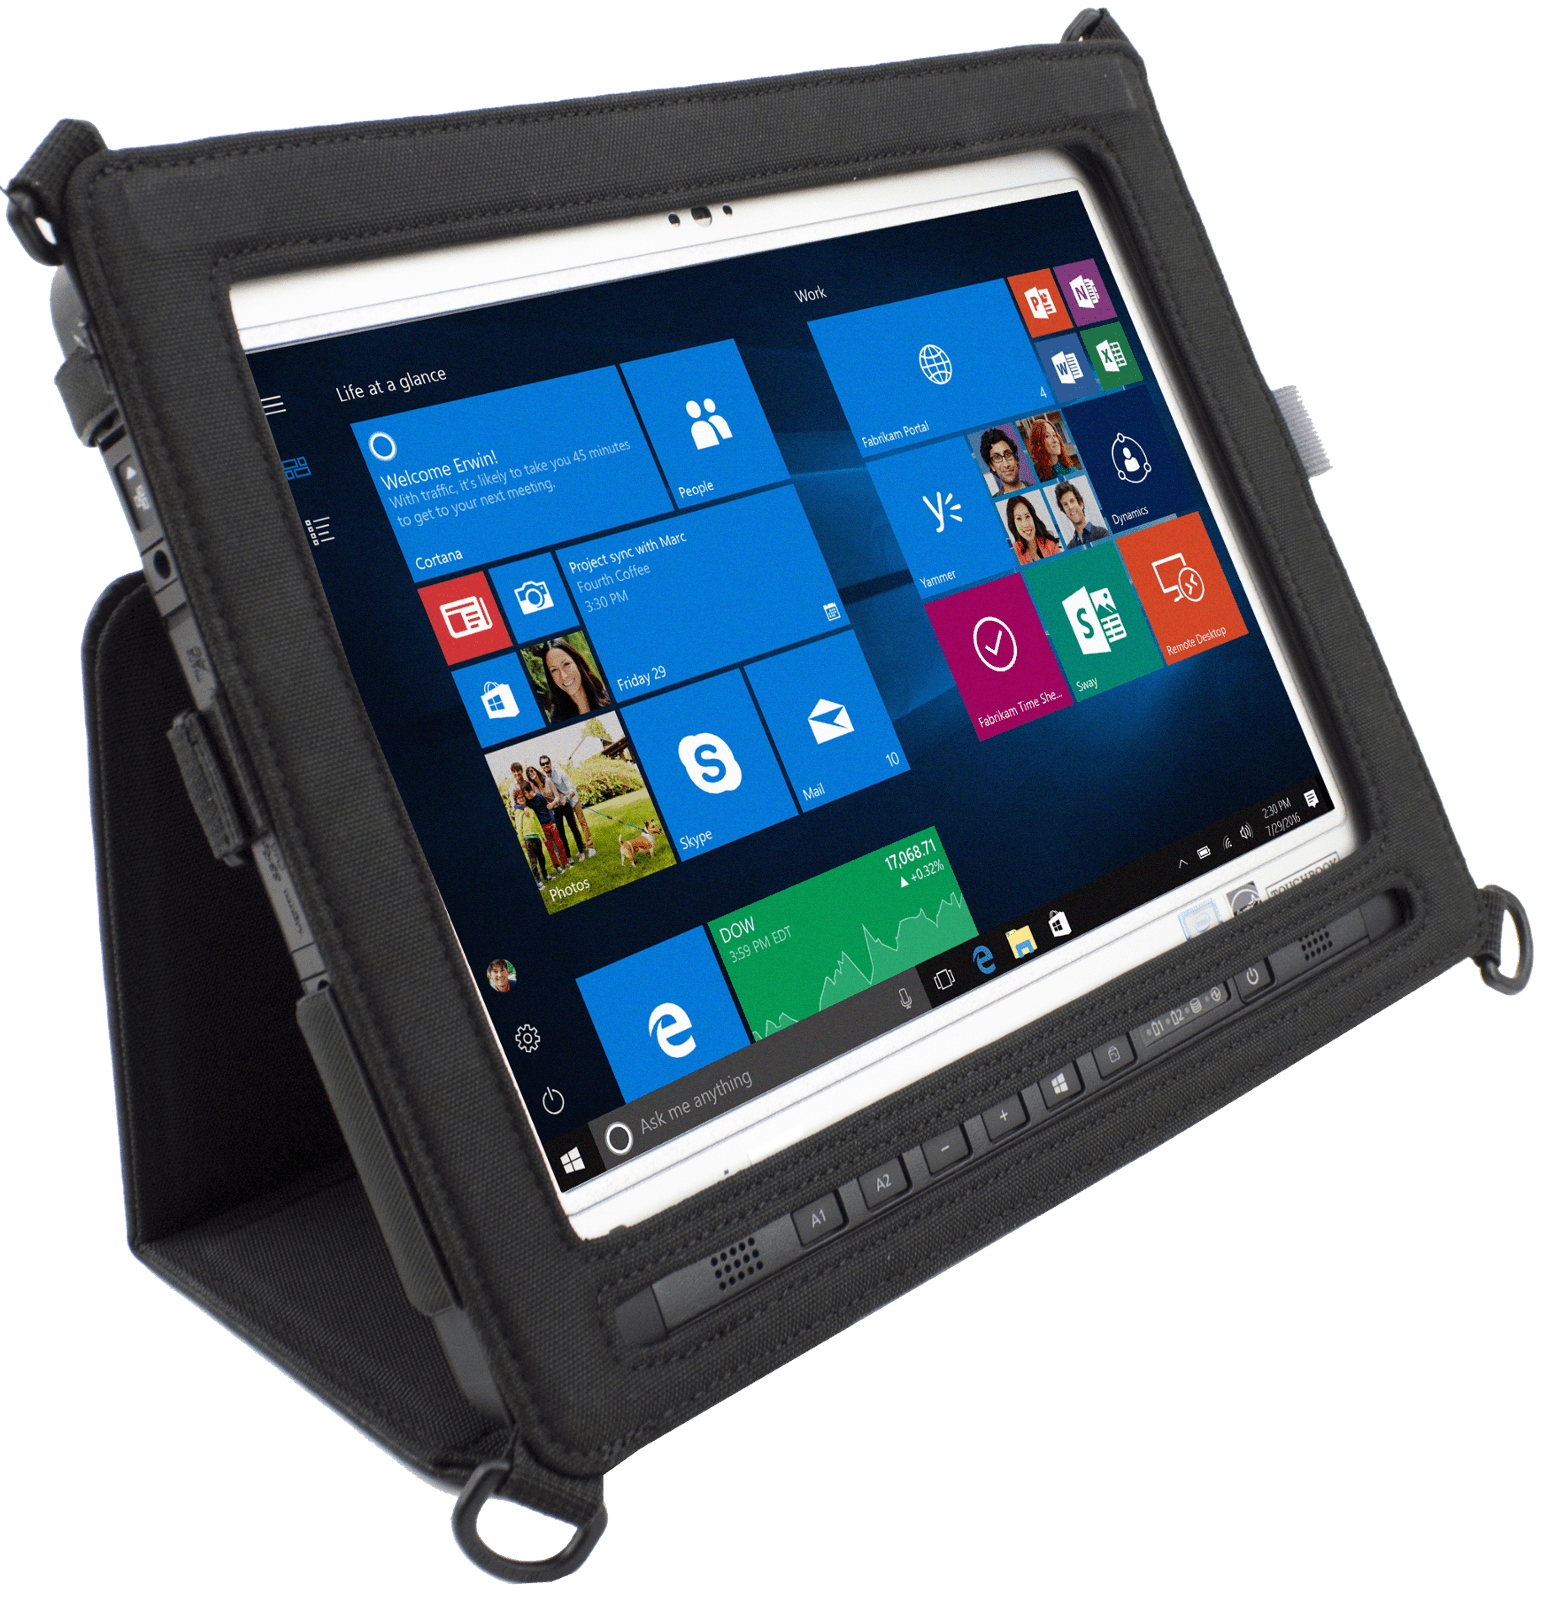 Toughmate 33 Tablet Always-On – Closeout